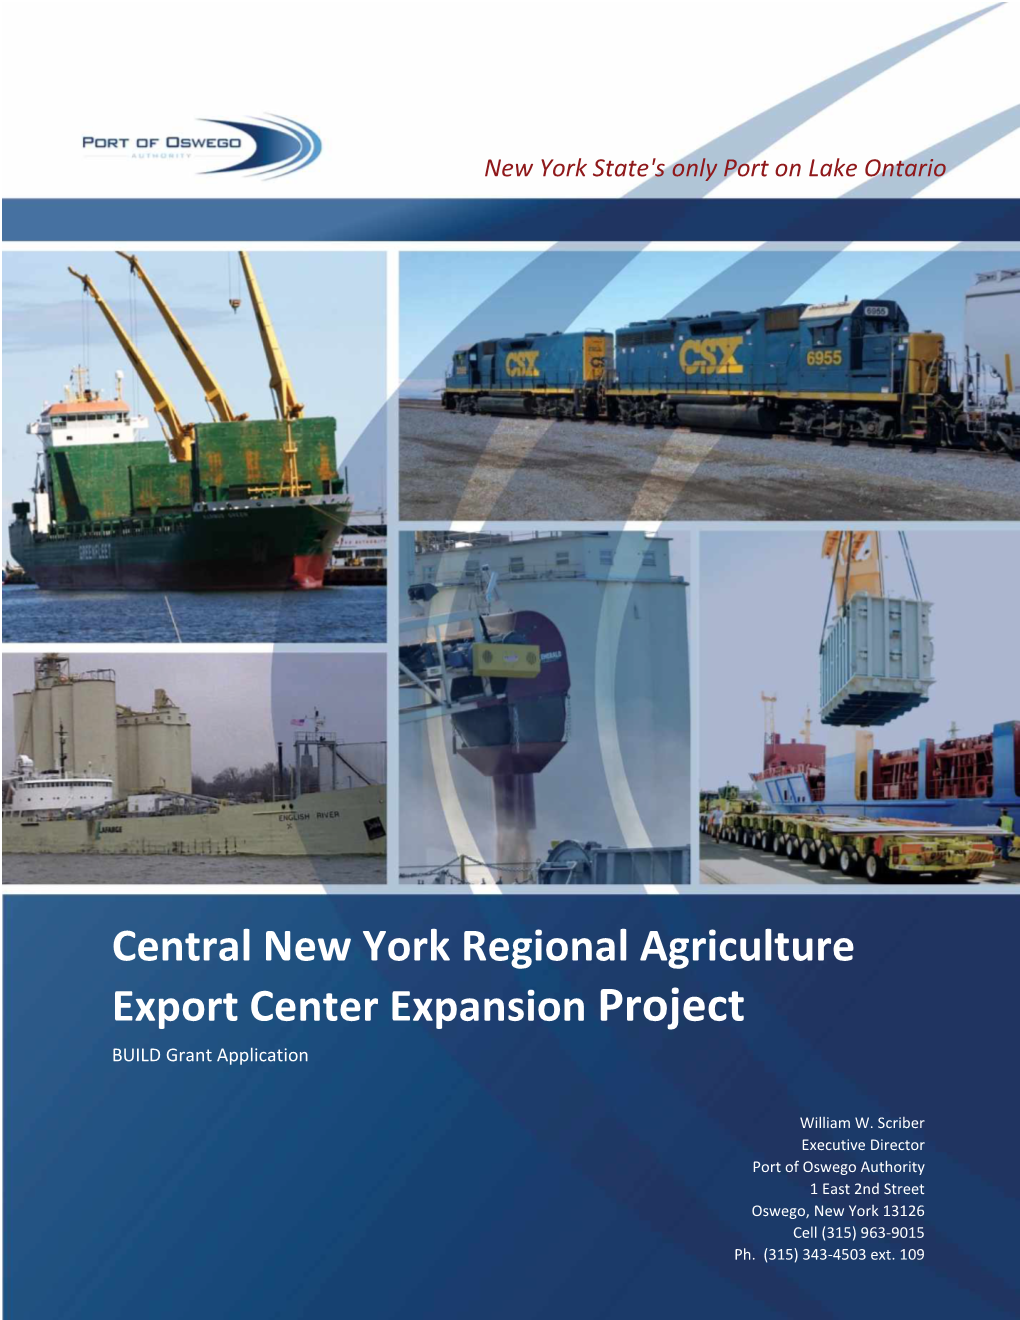 Central New York Regional Agriculture Export Center Expansion Project